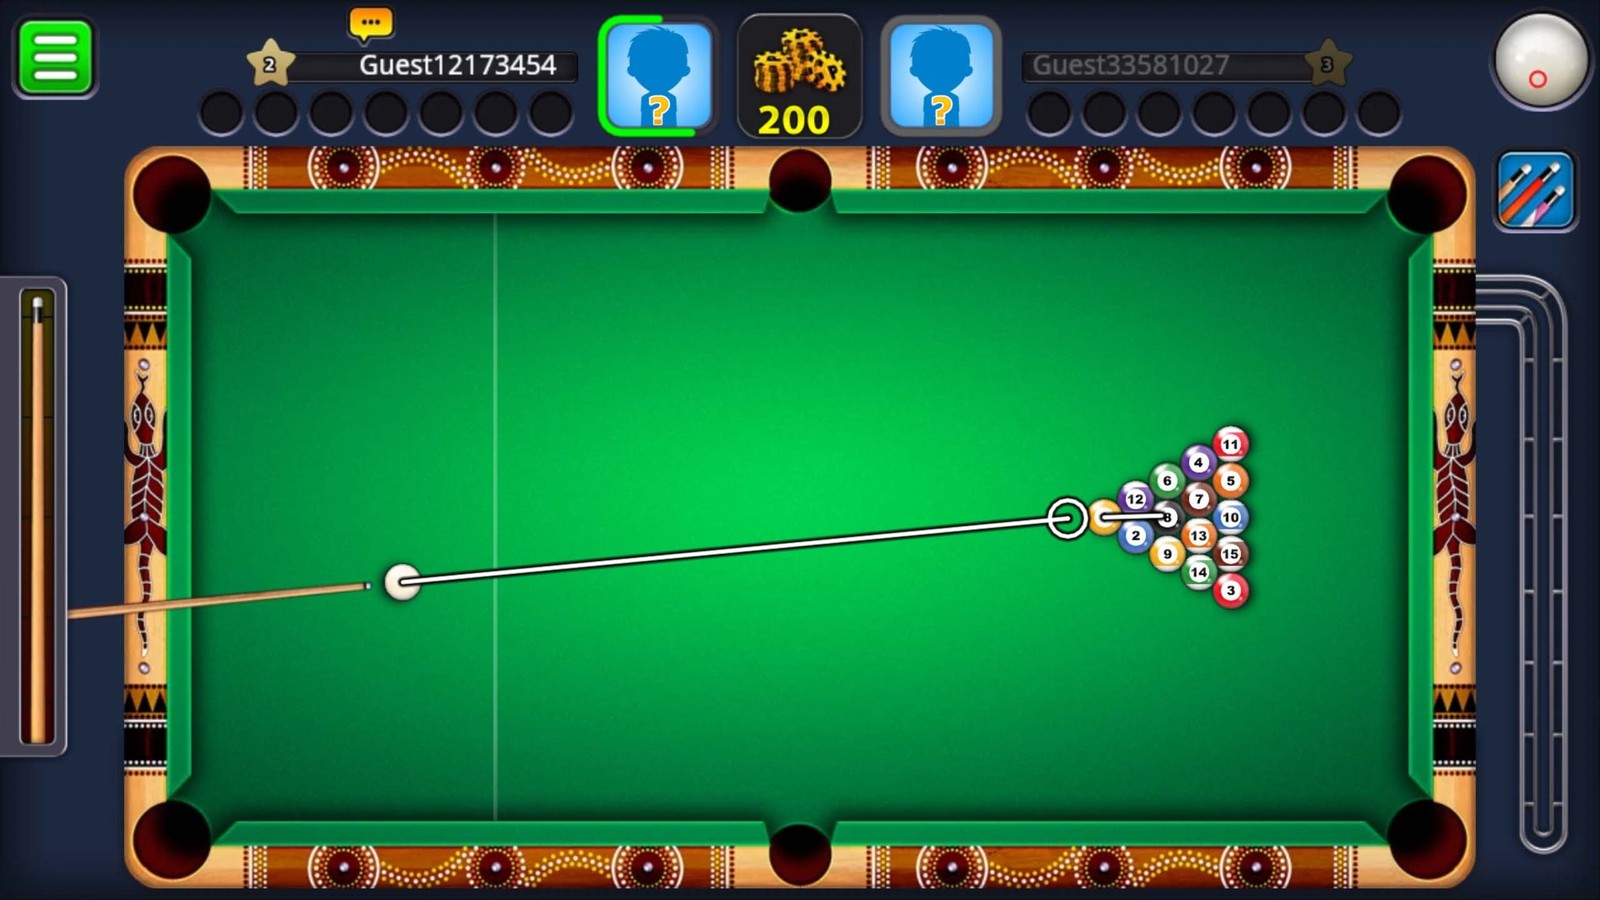 8 ball pool ultimate hack 4.3 download without survey